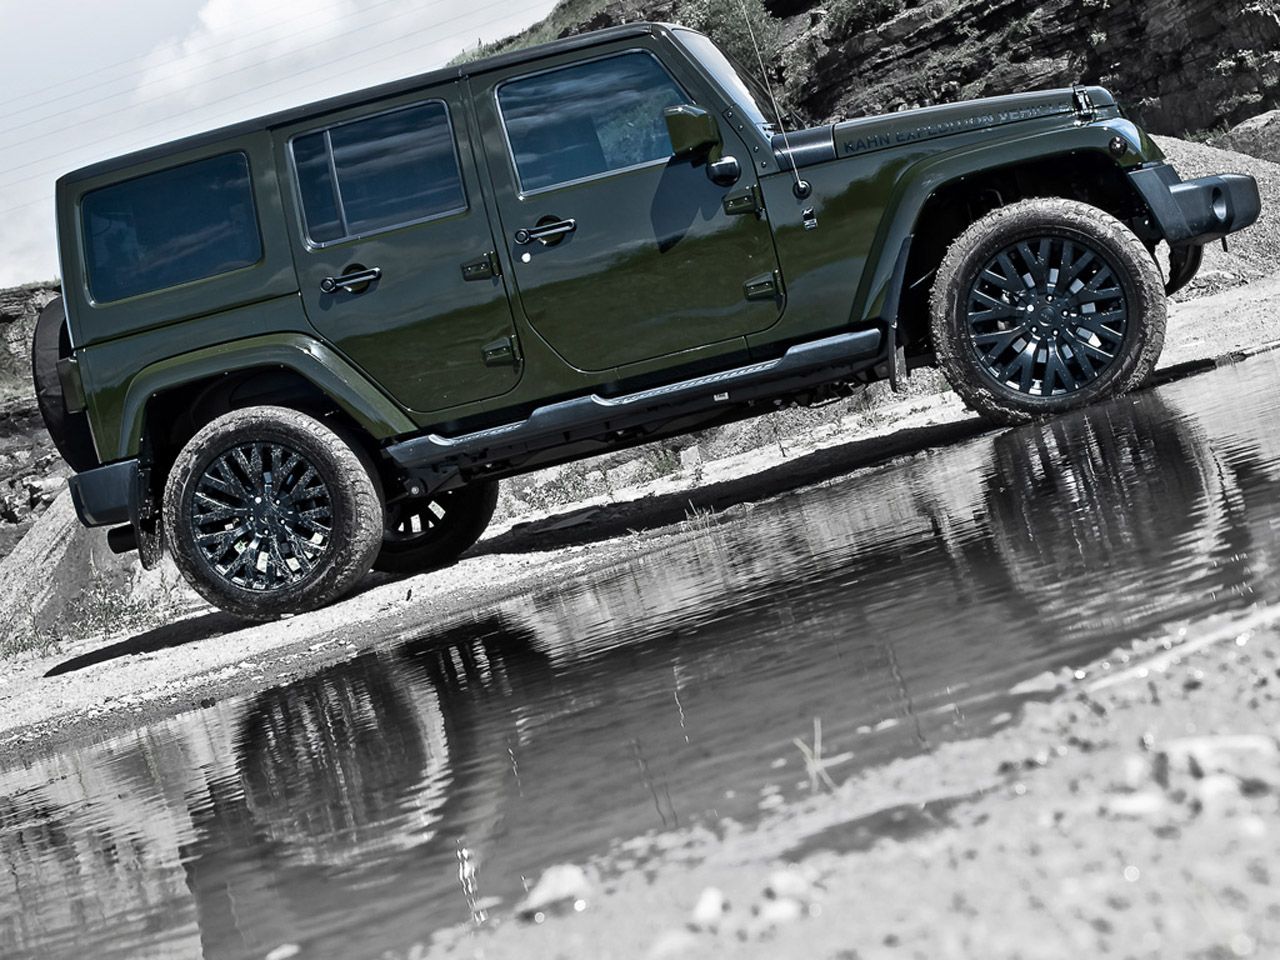 2012 Jeep Wrangler Chelsea Truck CJ300 Expedition Vehicle by Kahn Design